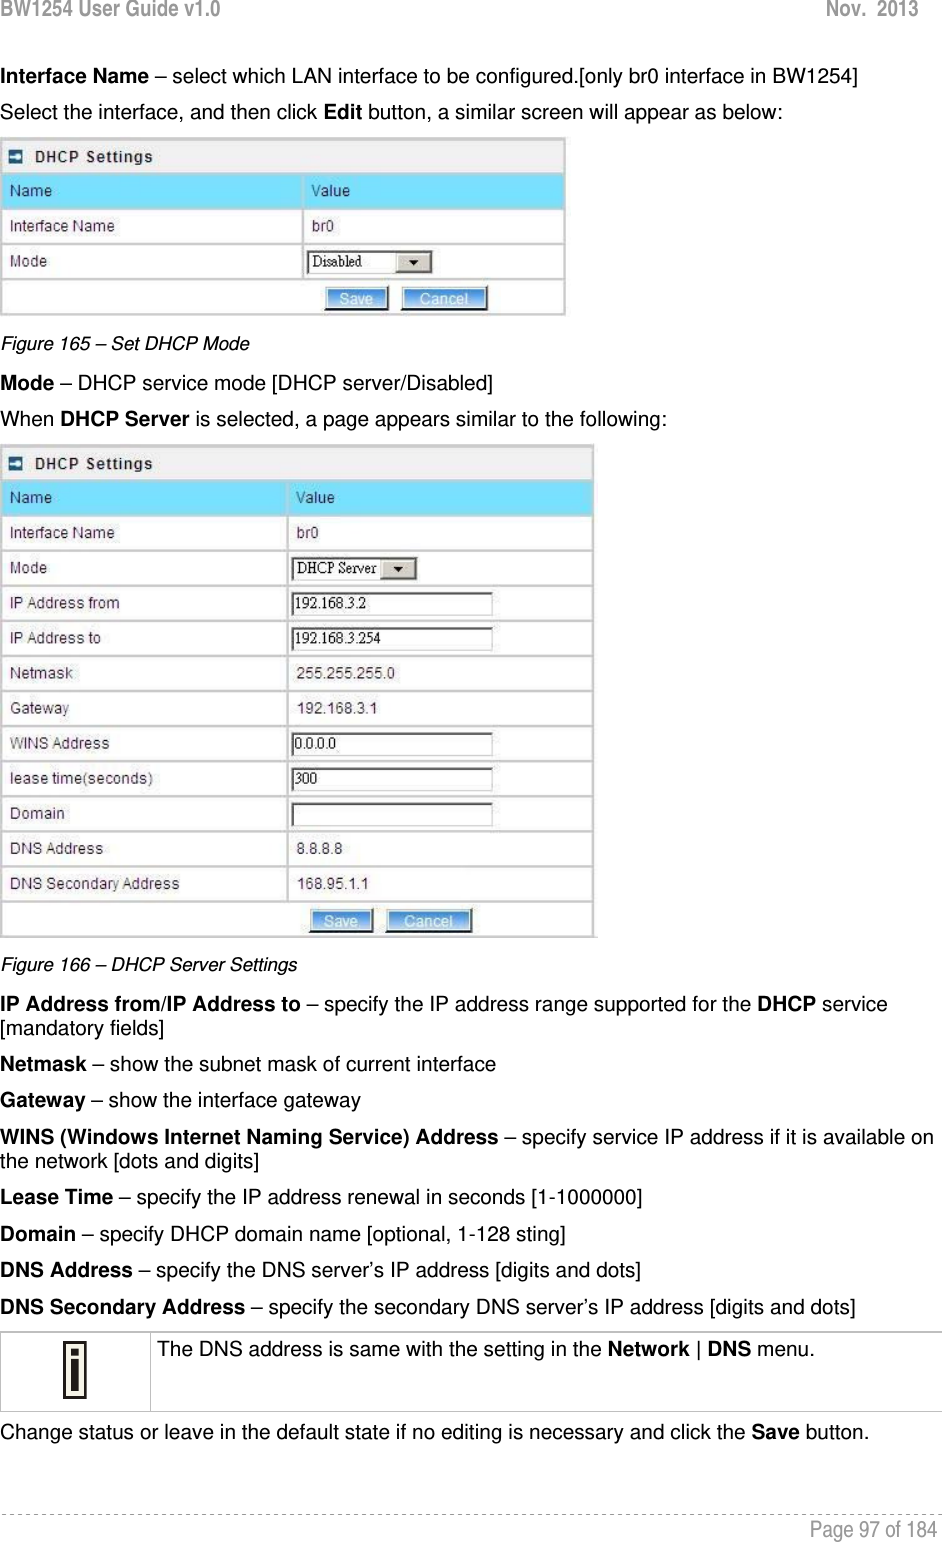 BW1254 User Guide v1.0  Nov.  2013     Page 97 of 184   Interface Name – select which LAN interface to be configured.[only br0 interface in BW1254] Select the interface, and then click Edit button, a similar screen will appear as below:  Figure 165 – Set DHCP Mode Mode – DHCP service mode [DHCP server/Disabled] When DHCP Server is selected, a page appears similar to the following:  Figure 166 – DHCP Server Settings IP Address from/IP Address to – specify the IP address range supported for the DHCP service [mandatory fields] Netmask – show the subnet mask of current interface Gateway – show the interface gateway WINS (Windows Internet Naming Service) Address – specify service IP address if it is available on the network [dots and digits] Lease Time – specify the IP address renewal in seconds [1-1000000] Domain – specify DHCP domain name [optional, 1-128 sting] DNS Address – specify the DNS server’s IP address [digits and dots] DNS Secondary Address – specify the secondary DNS server’s IP address [digits and dots]  The DNS address is same with the setting in the Network | DNS menu. Change status or leave in the default state if no editing is necessary and click the Save button.  